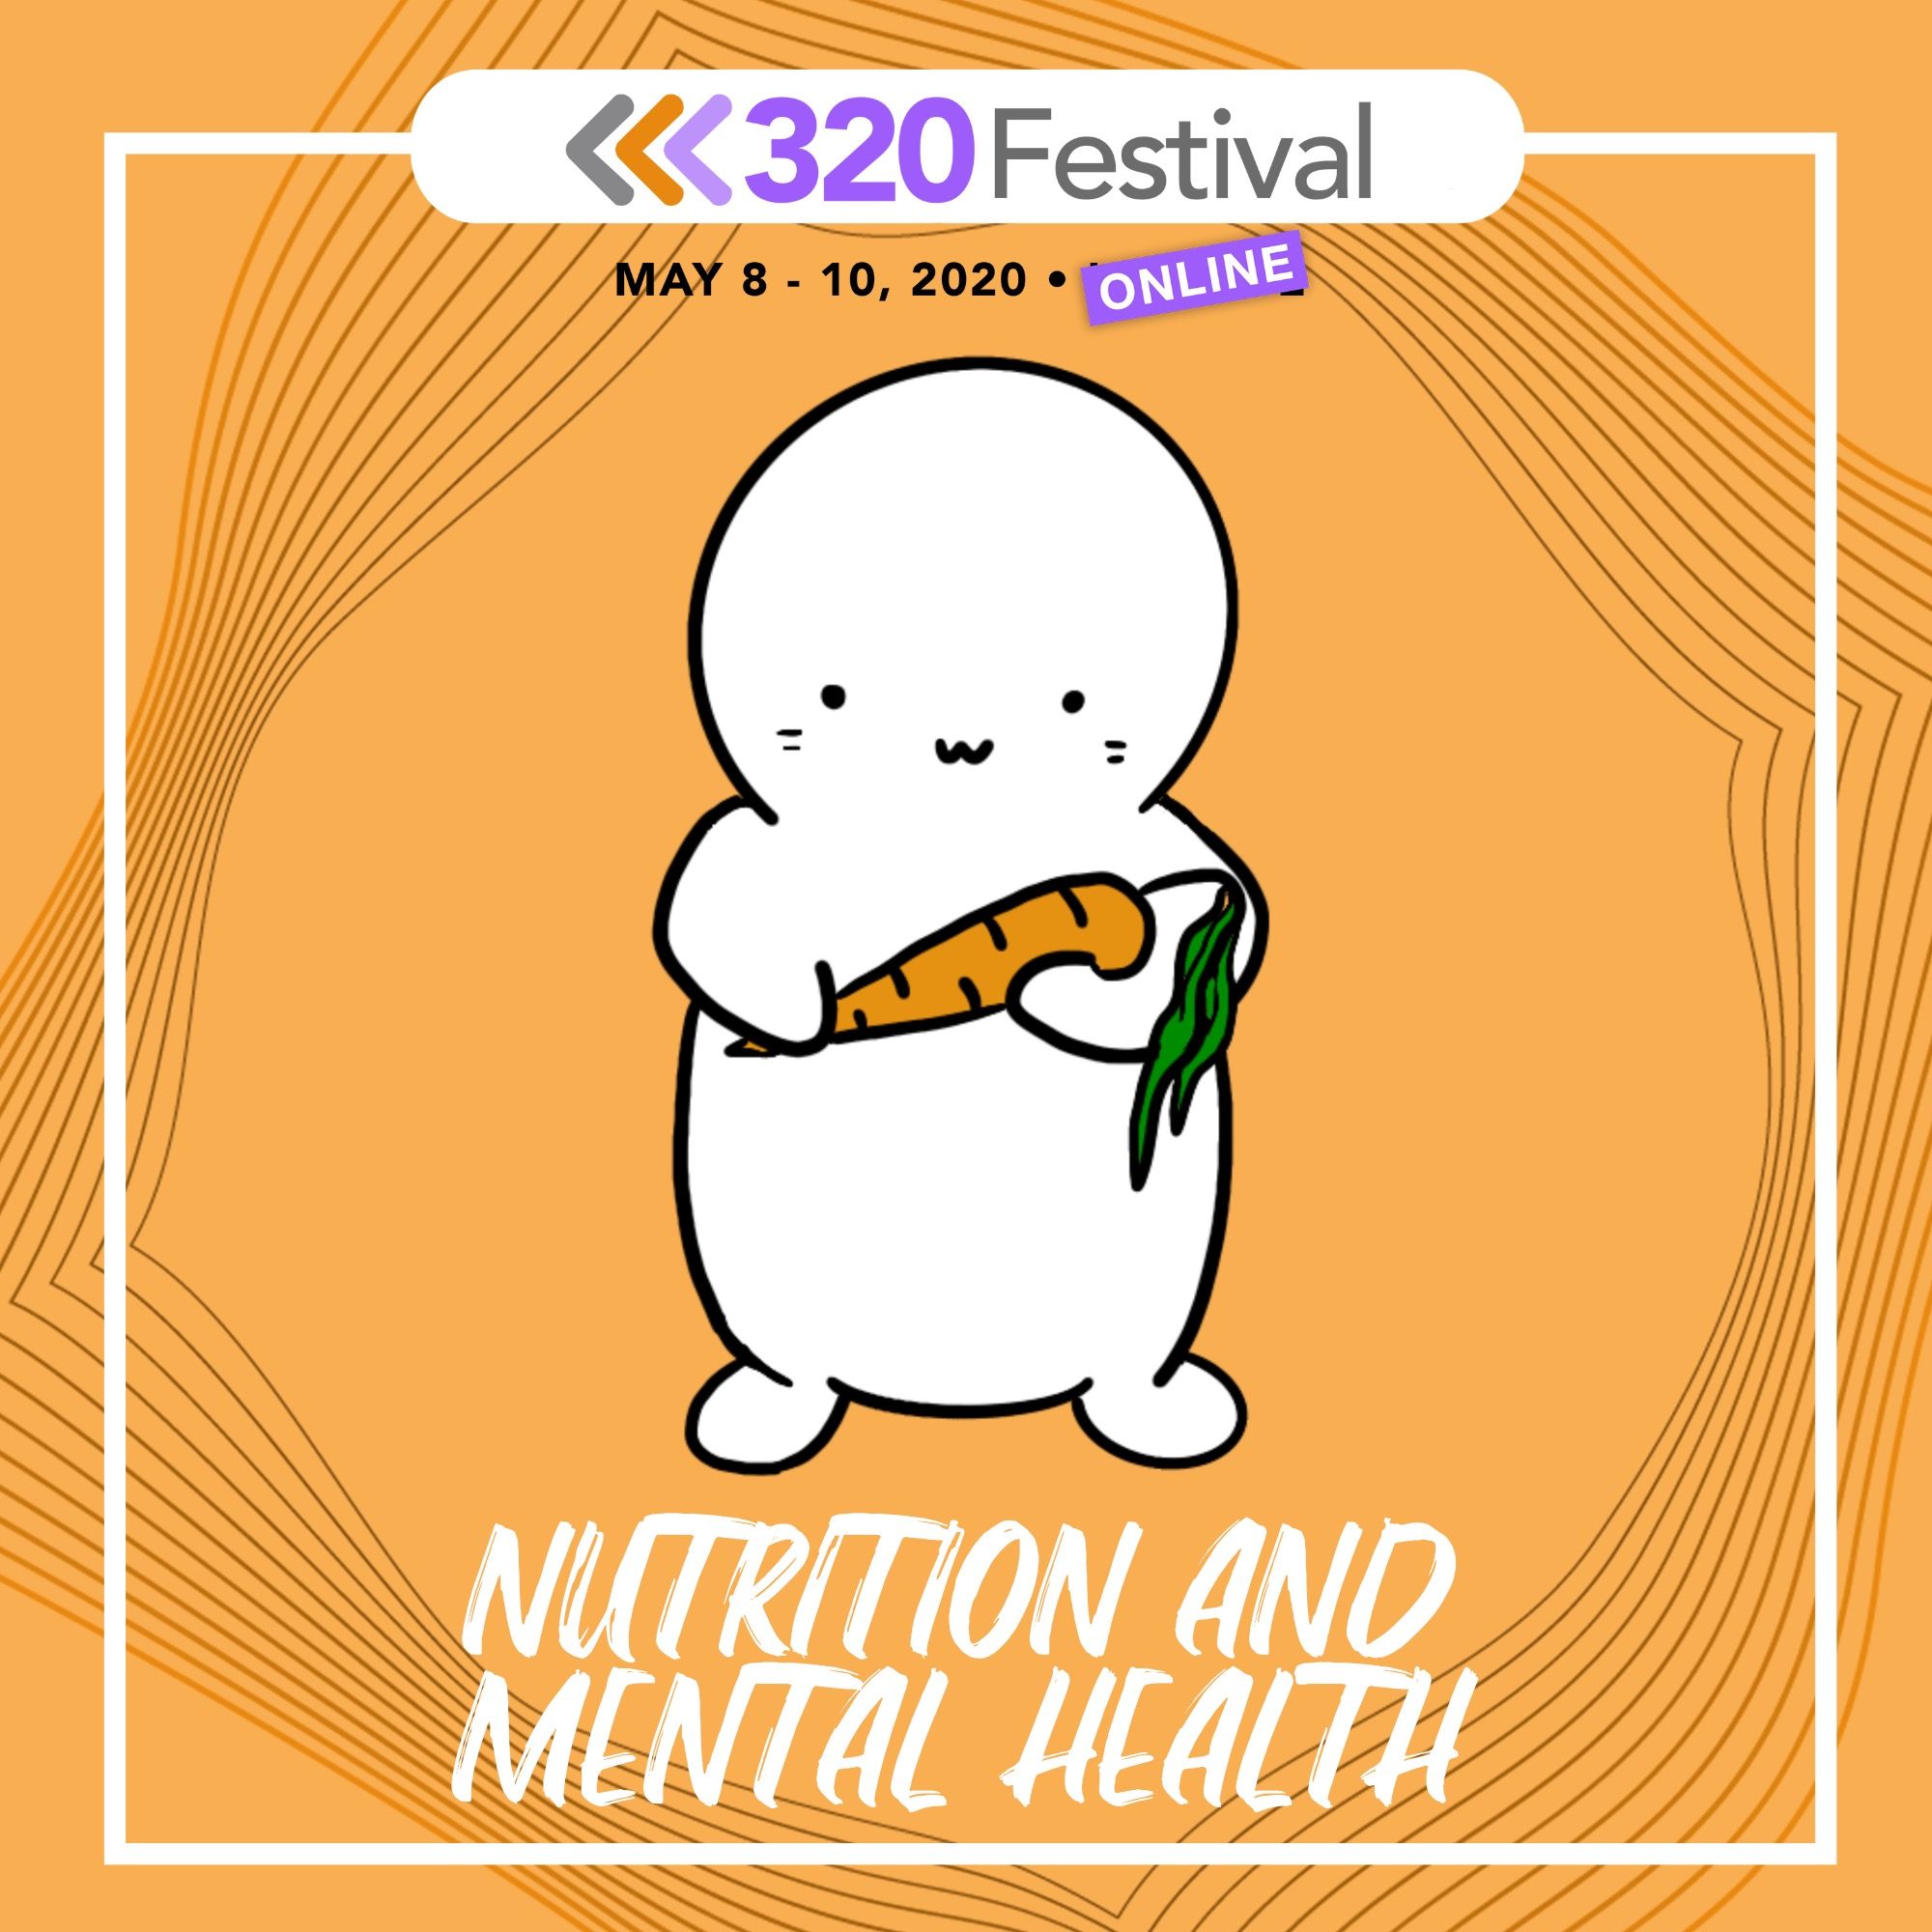 Watch Nutrition & Mental Health Panel from @320 Festival